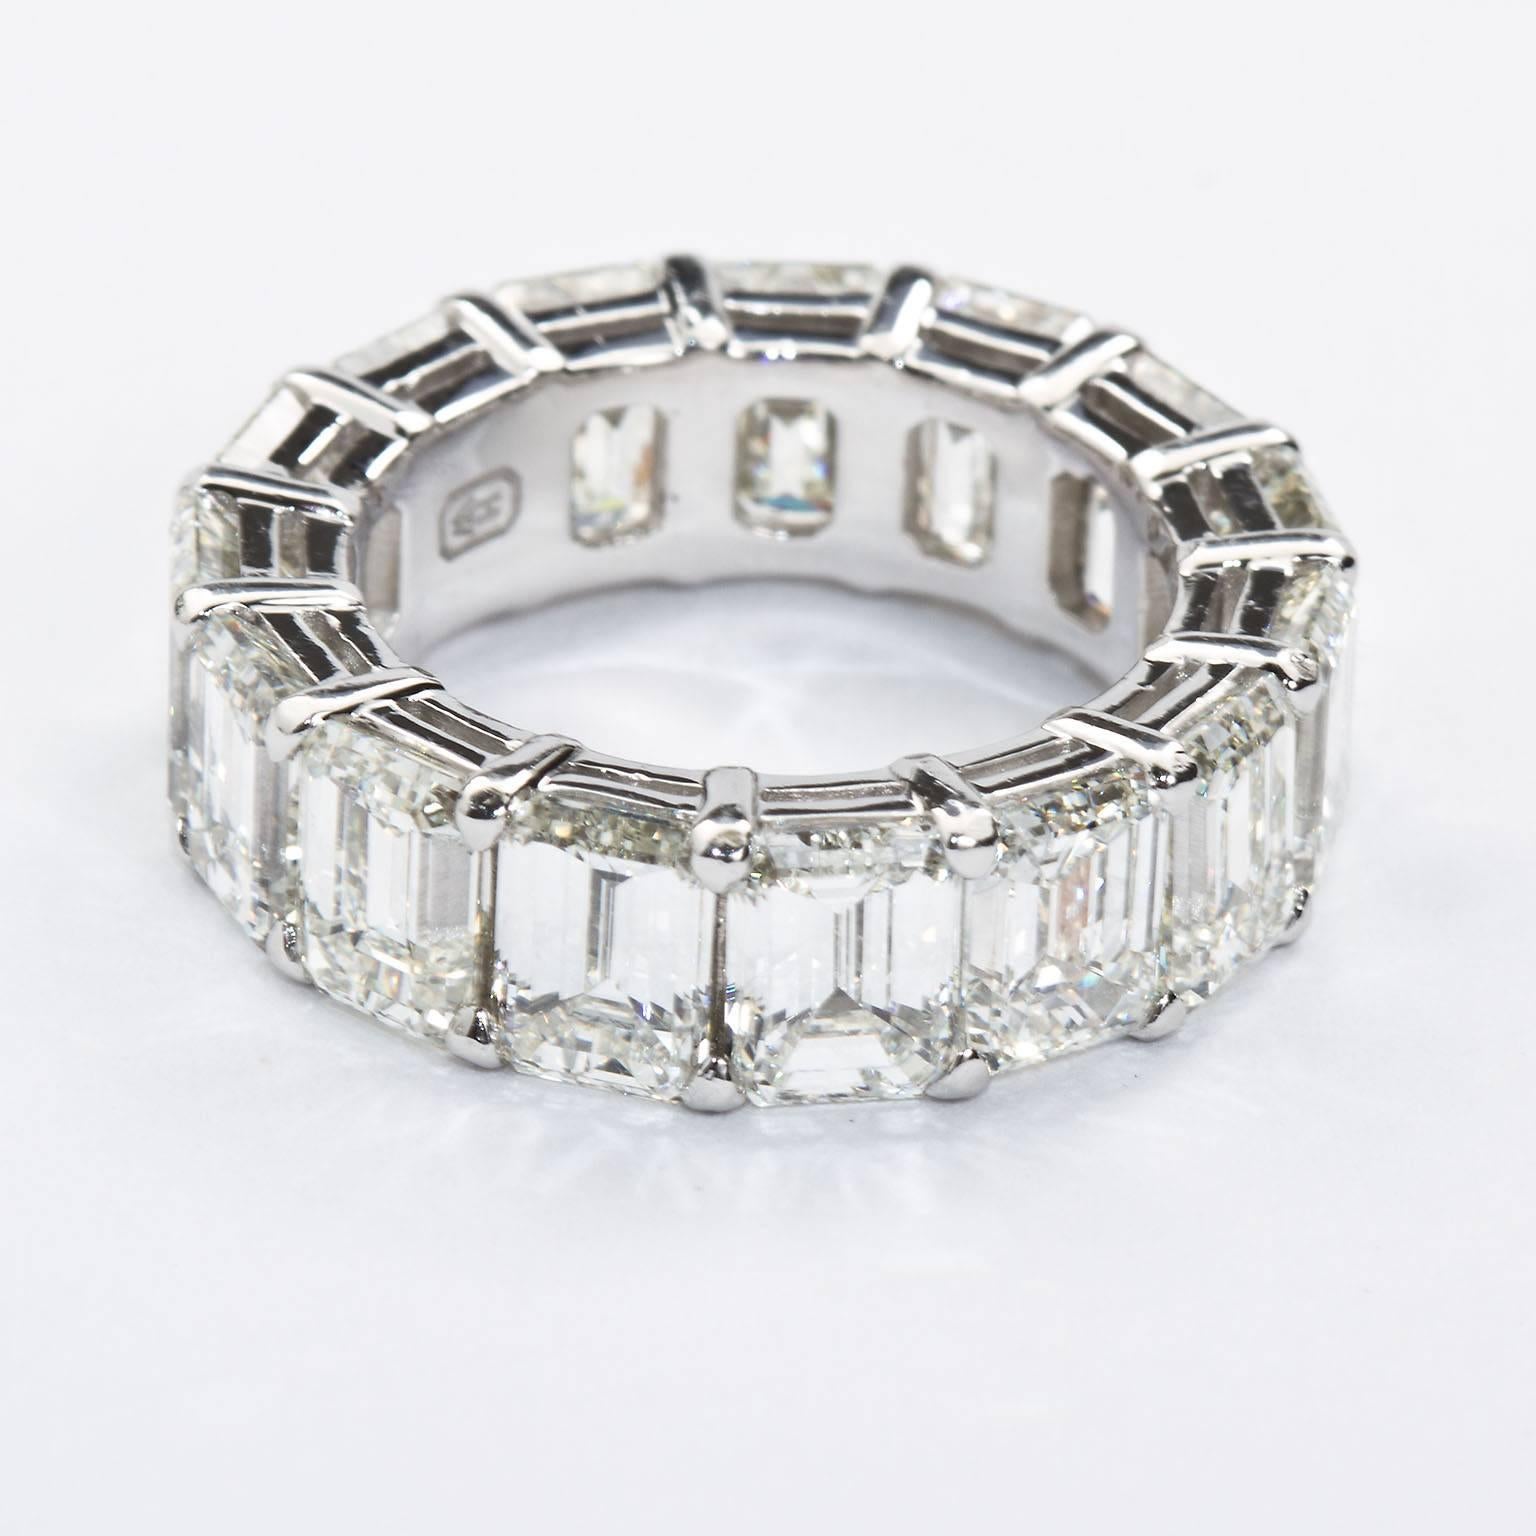 As fine an eternity band as is available in New York City, Beverly Hills, Paris, Hong Kong or Little Rock, Arkansas for that matter. This very fine diamond eternity band merges the best combination of diamond color, clarity, size, and price to form